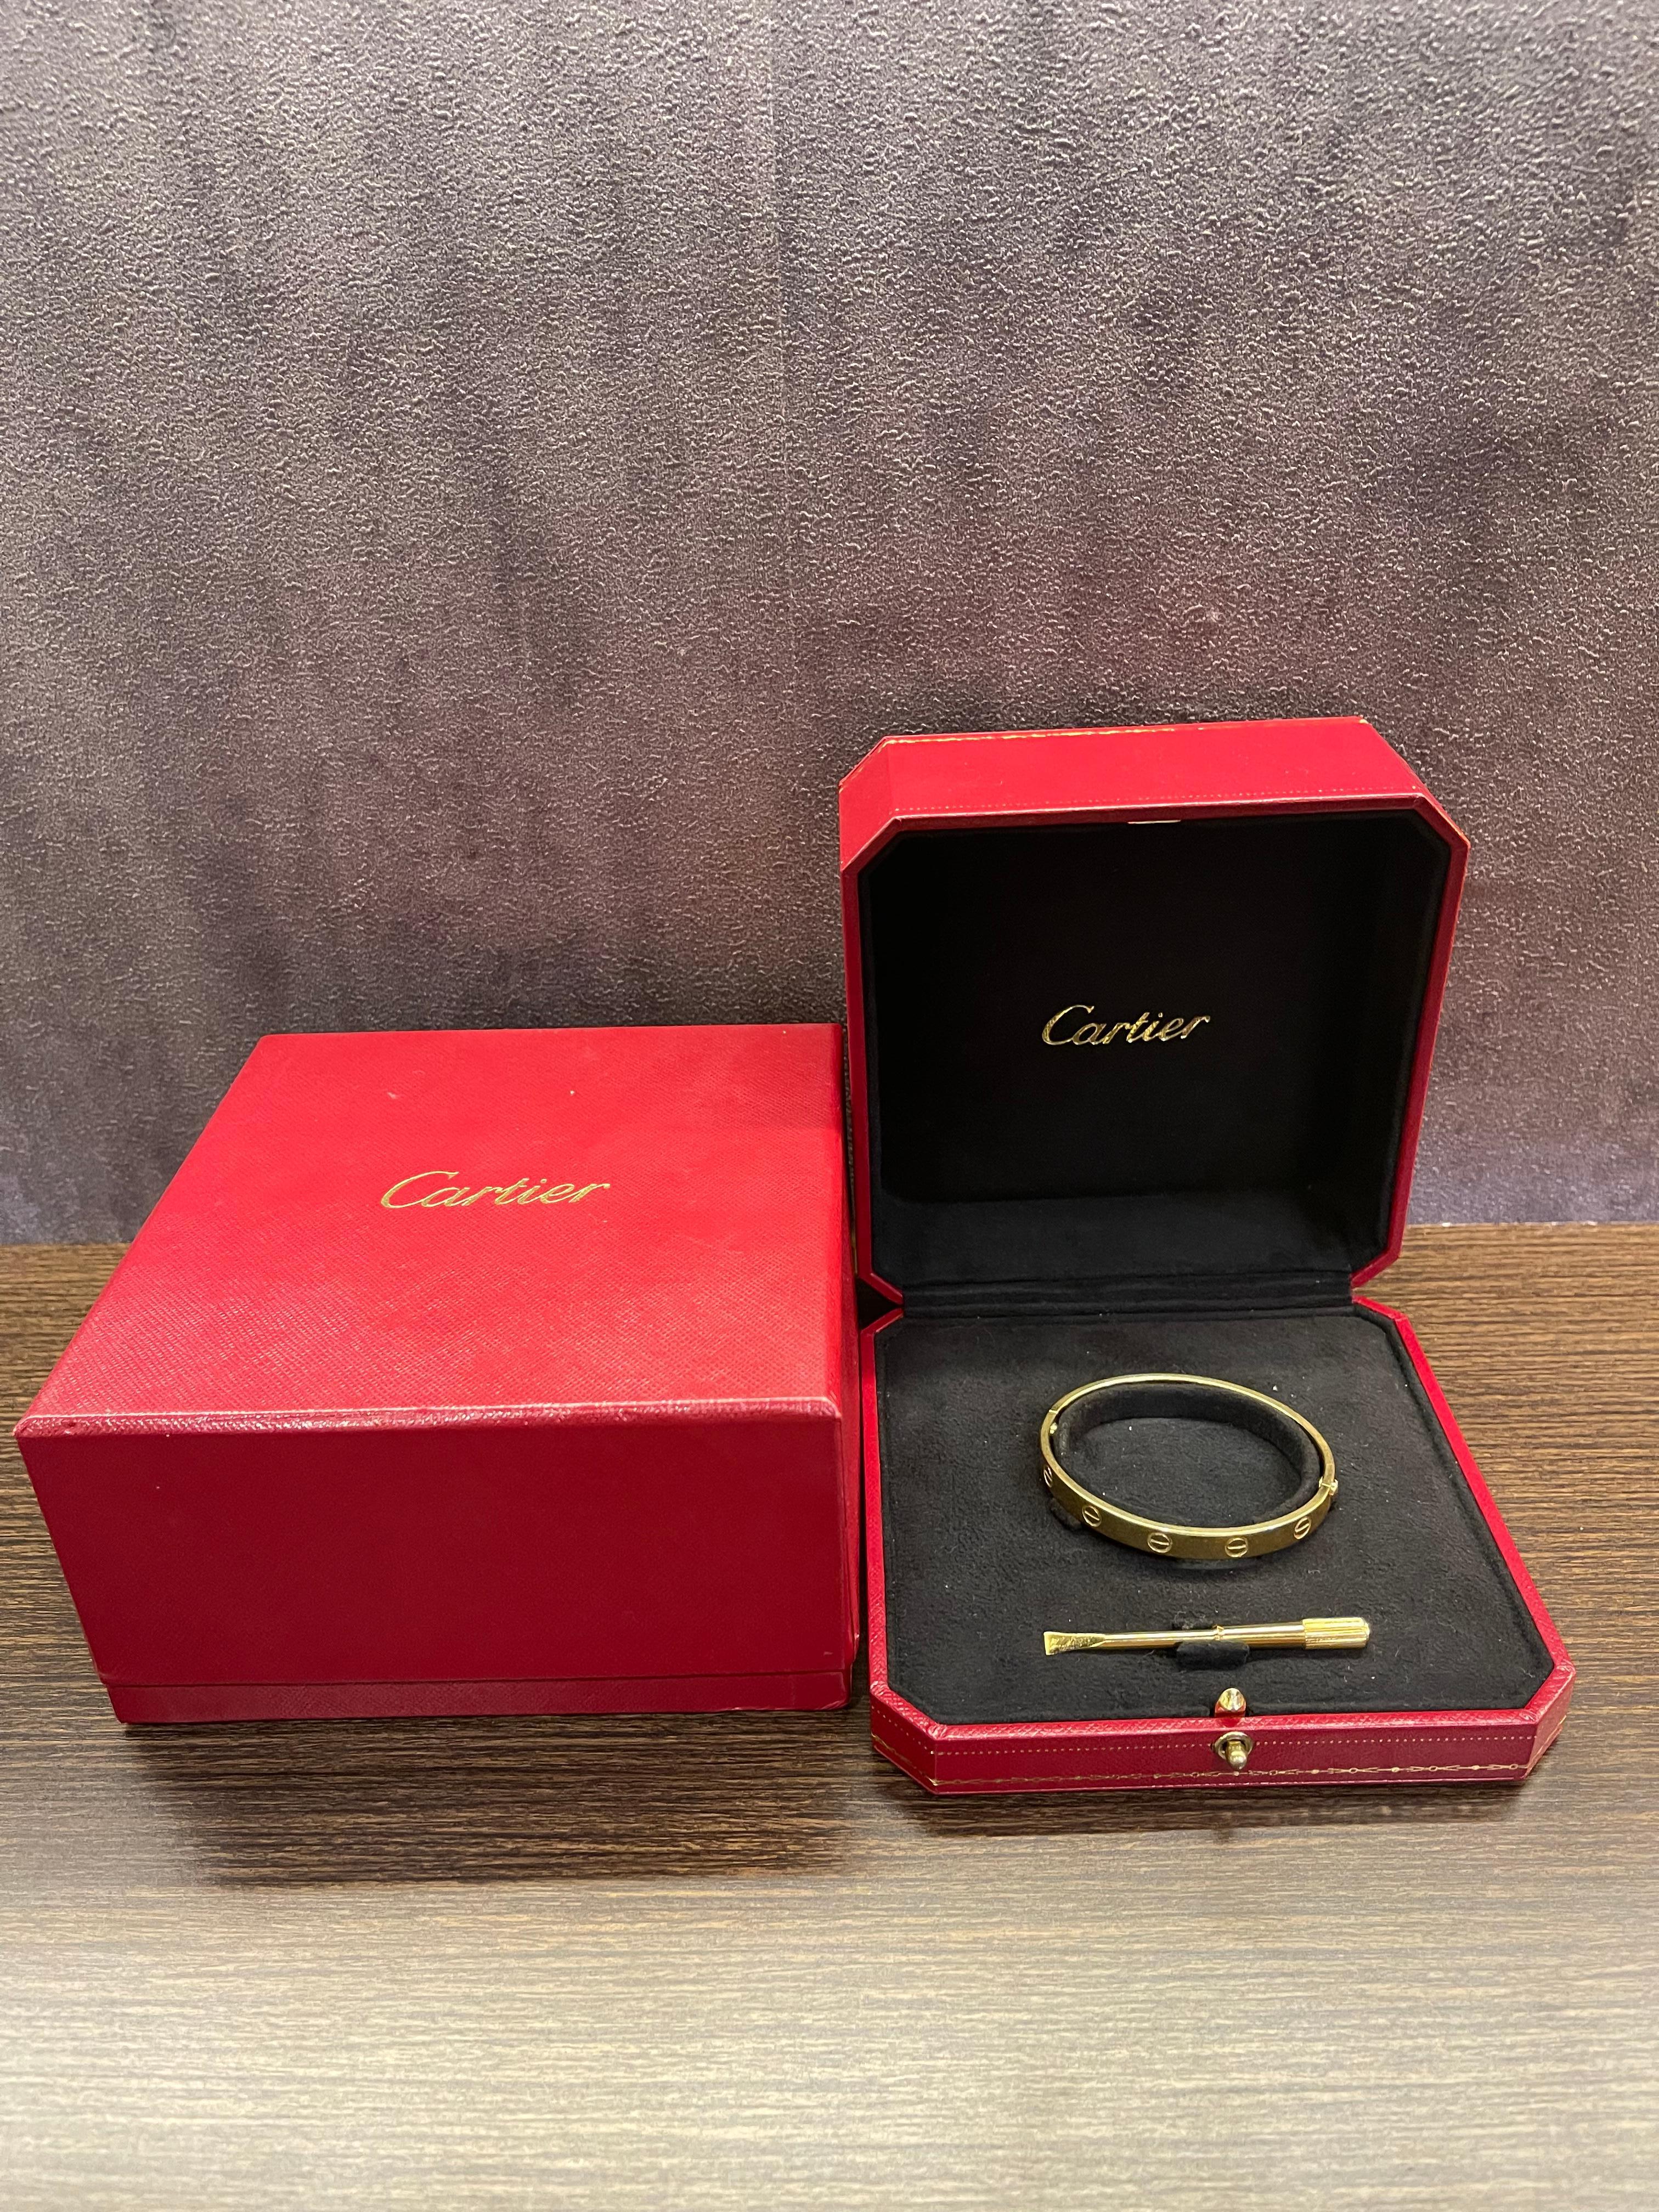 Beautiful vintage cartier love bracelet from early 2000s. Comes with its box and screwdriver. Item is missing its certificate, but has been through repair in Cartier official store in Japan and there is a repair receipt for it. Faint hairline